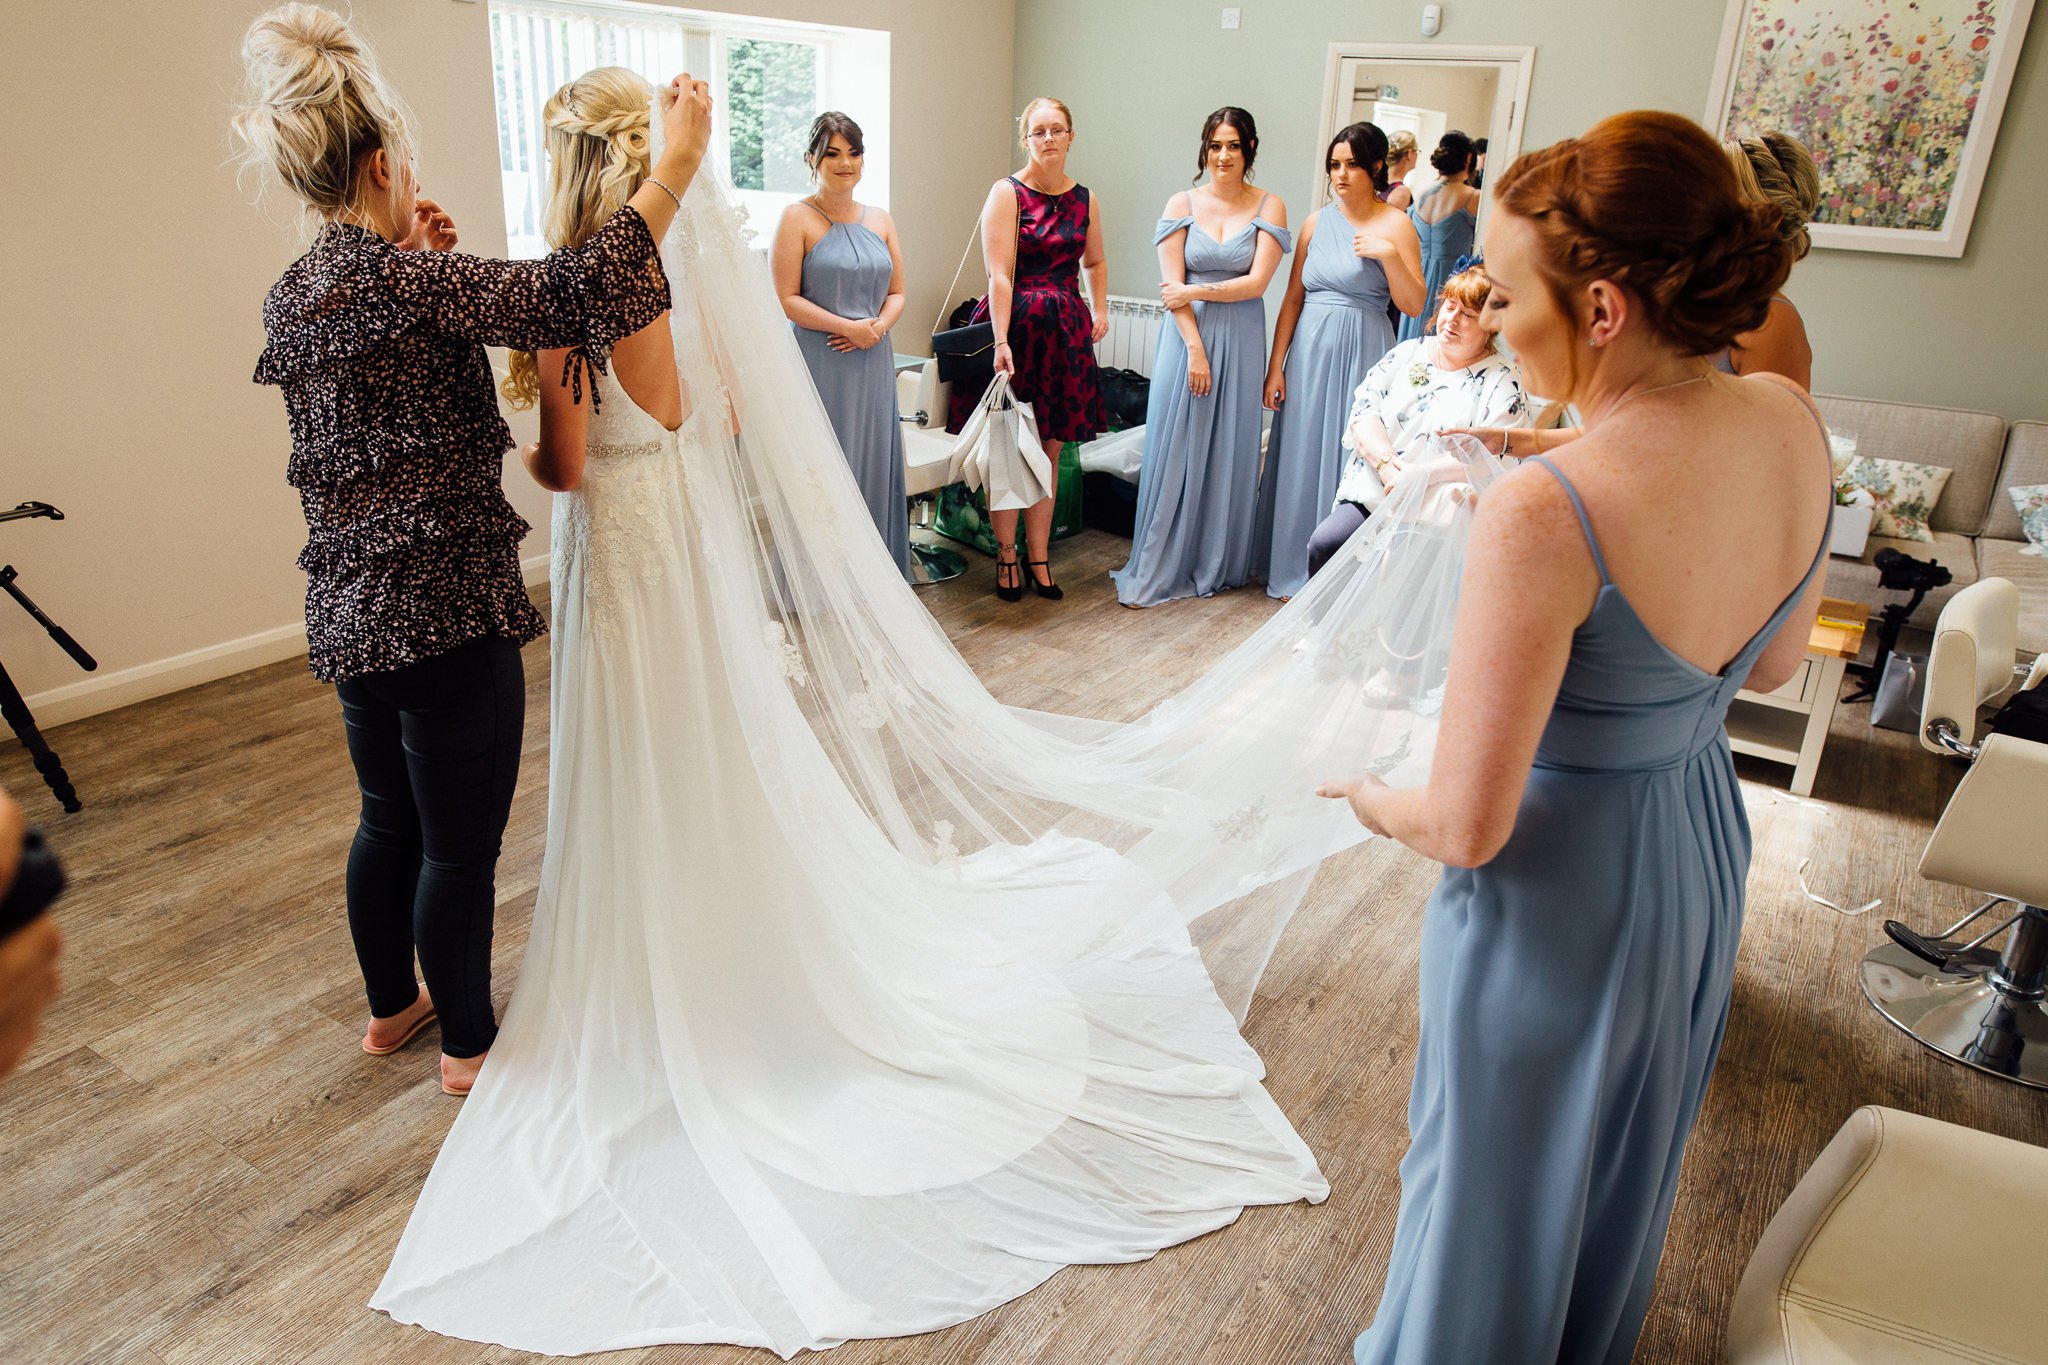  The bridal party gather around to see the Bride in her dress 